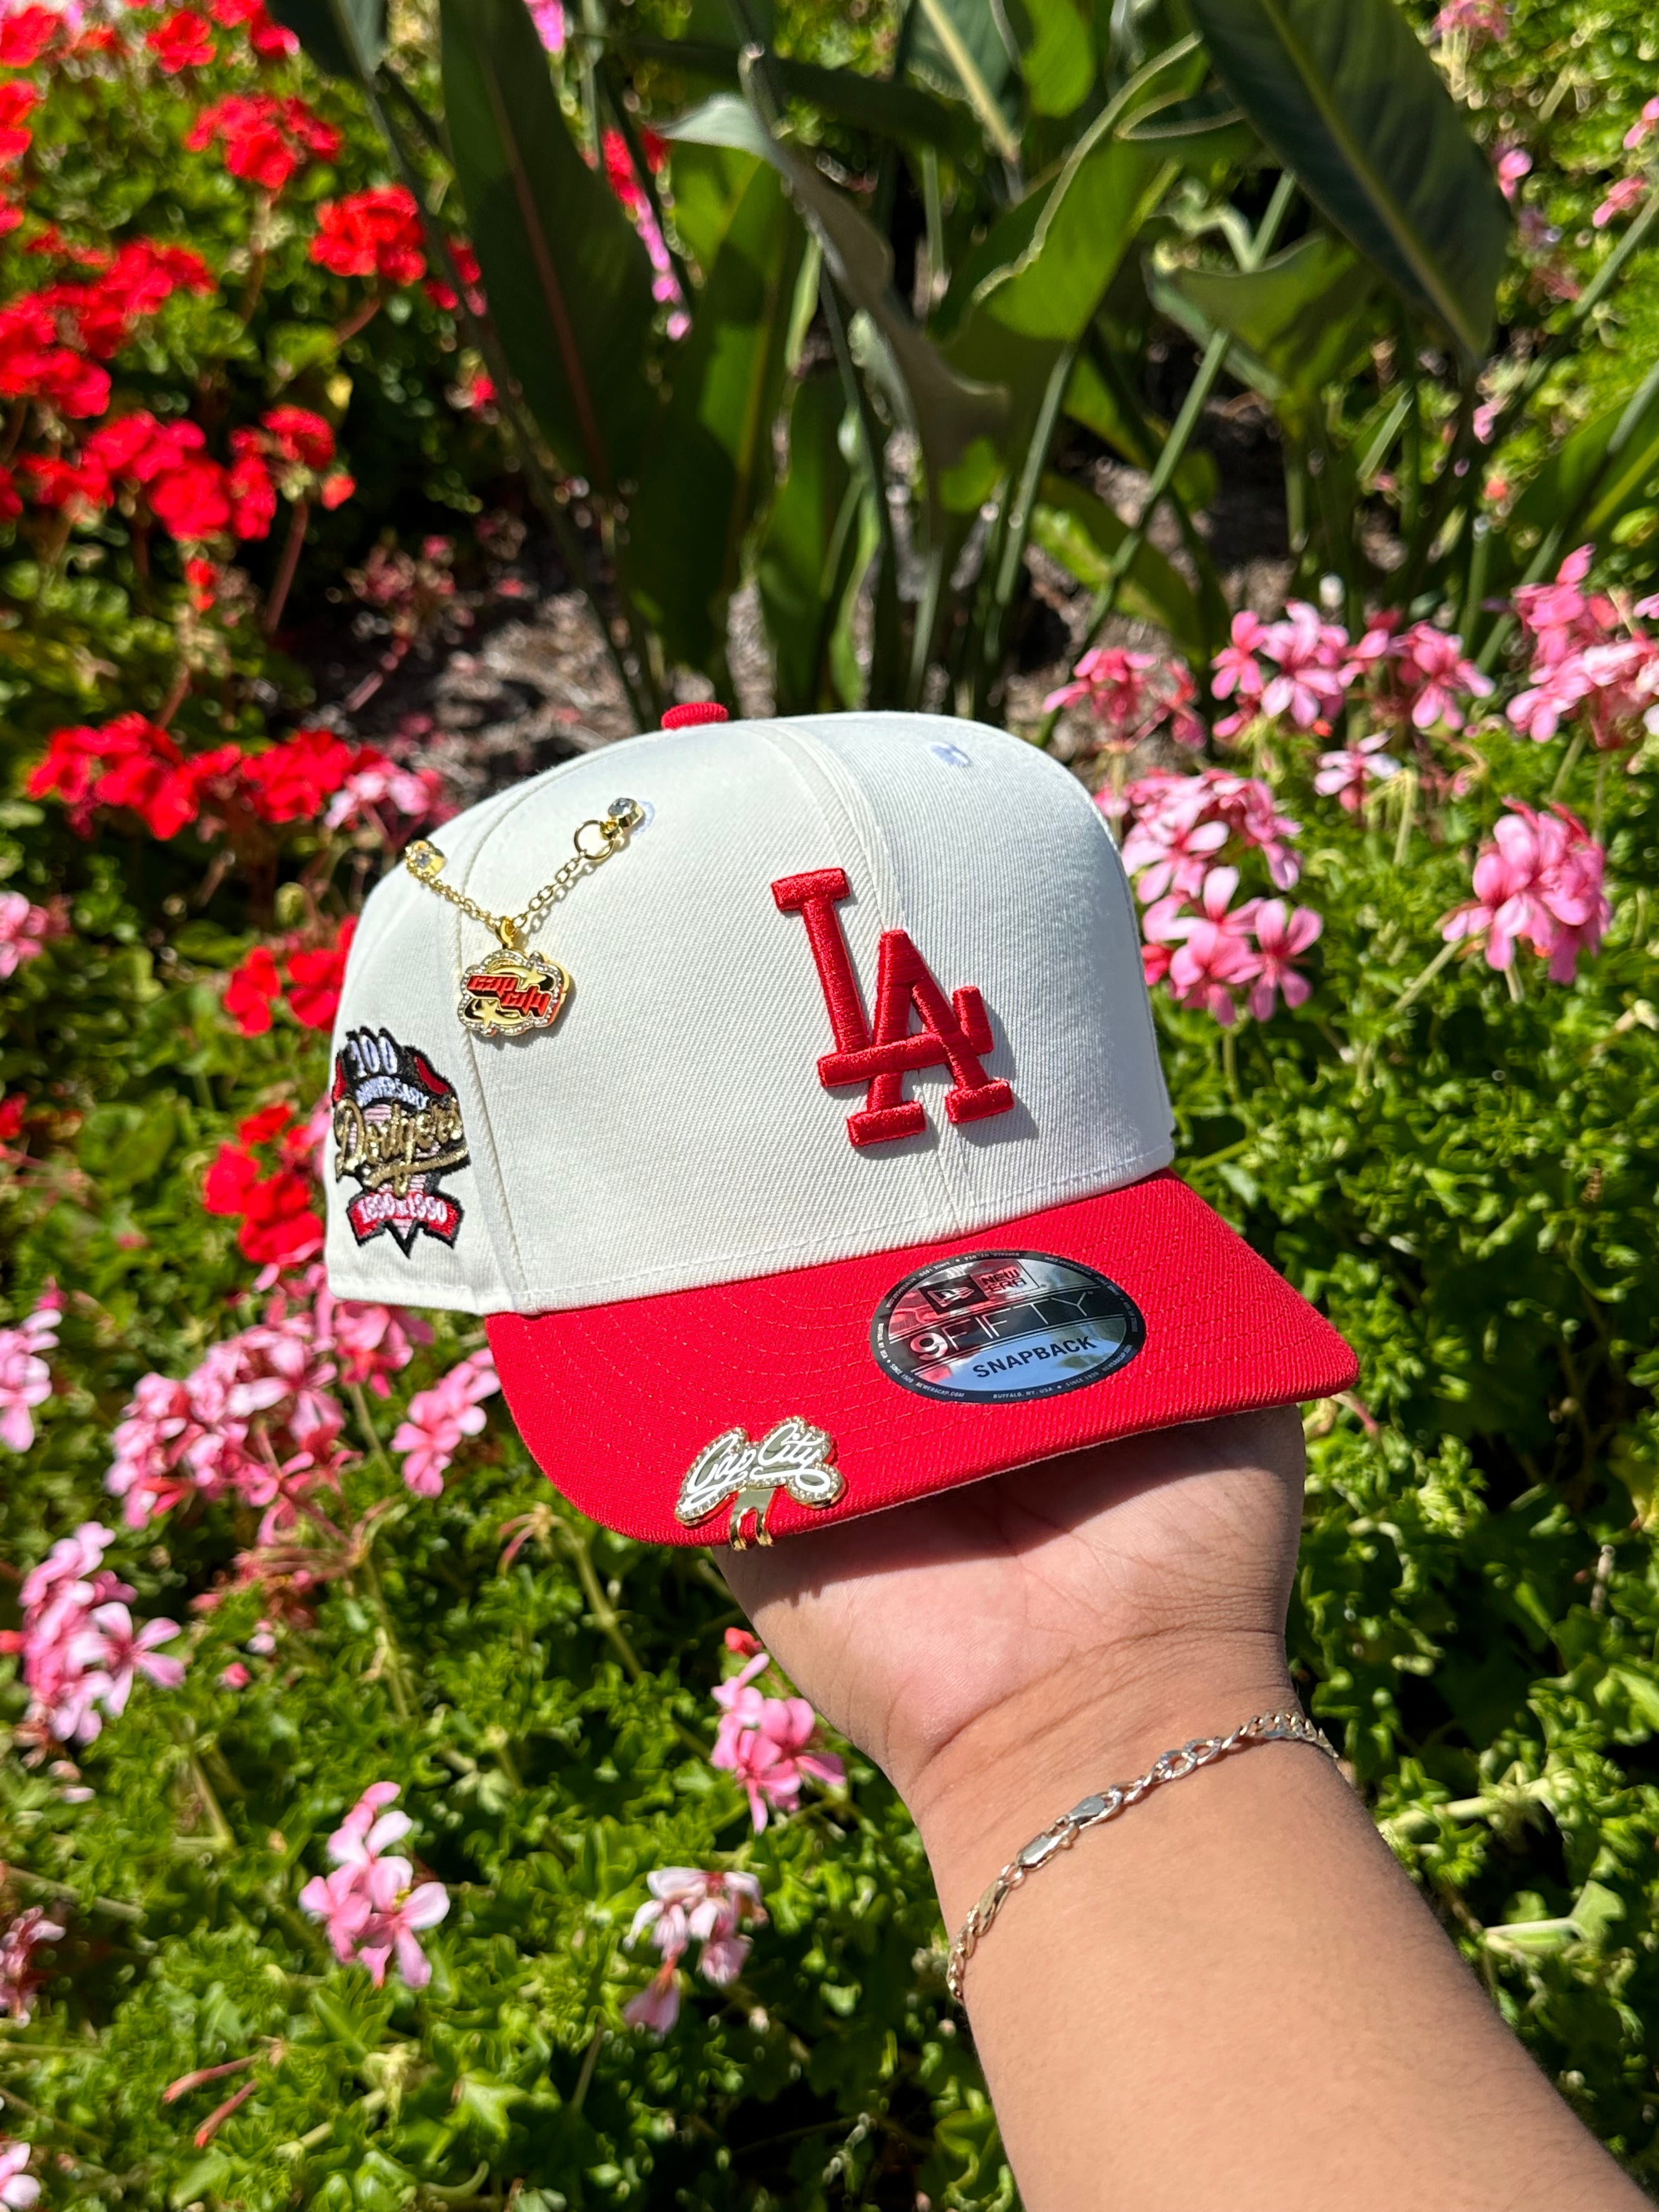 NEW ERA EXCLUSIVE 9FIFTY CHROME WHITE/RED LOS ANGELES DODGERS SNAPBACK W/ 100TH ANNIVERSARY PATCH